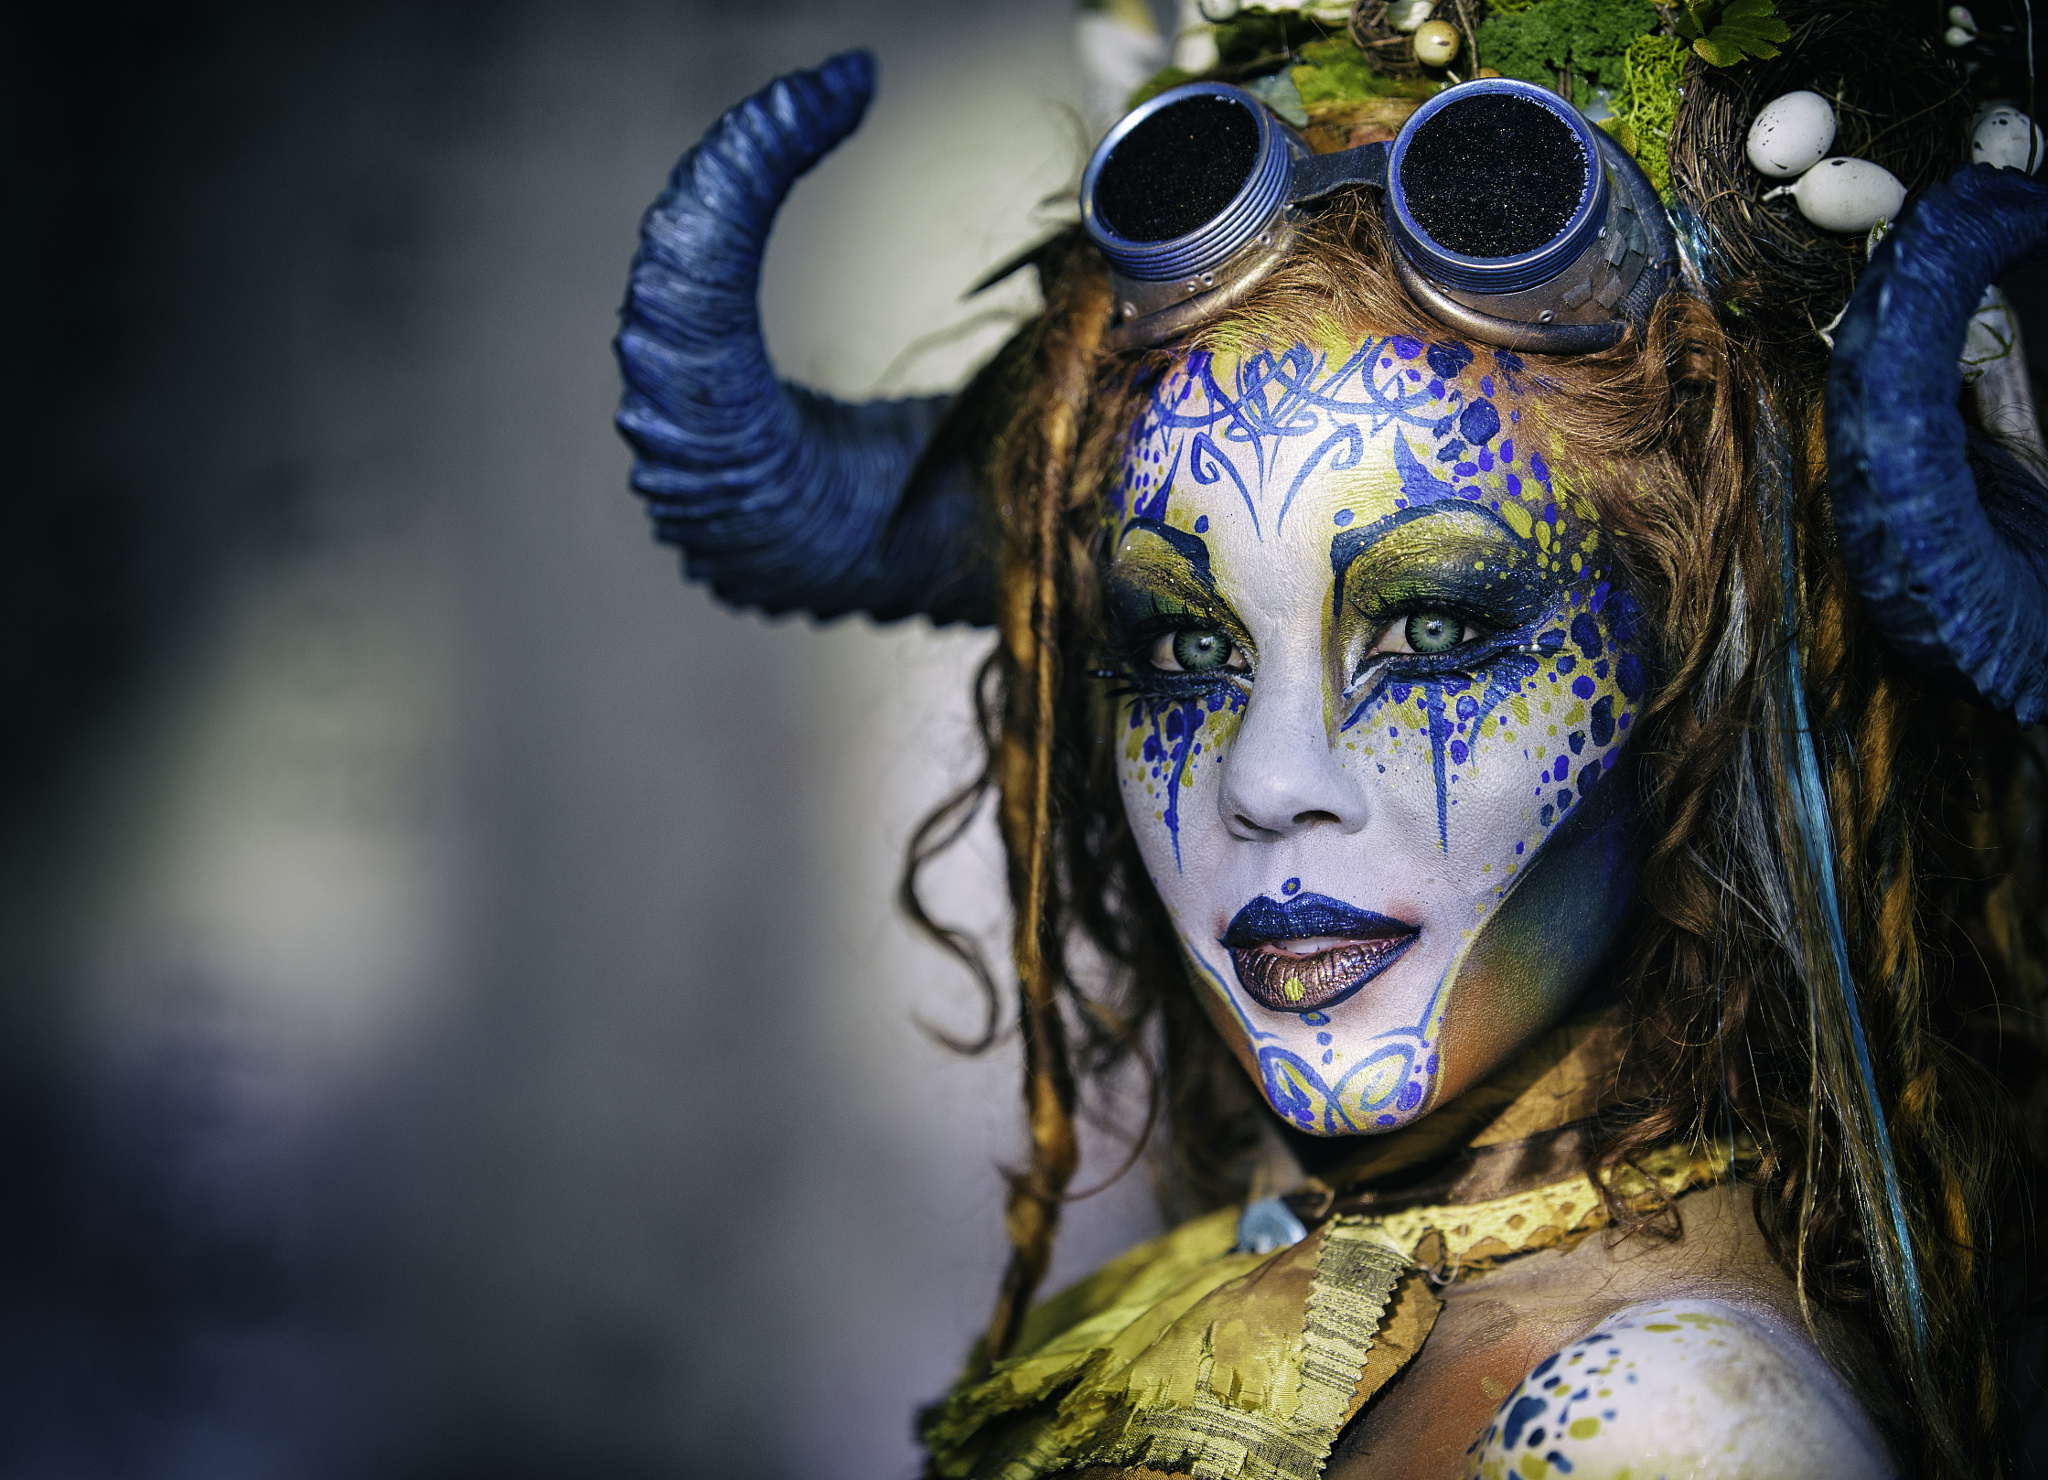 Shooting the Most Insane Body Painting You've Ever Seen with Circus North & 500px